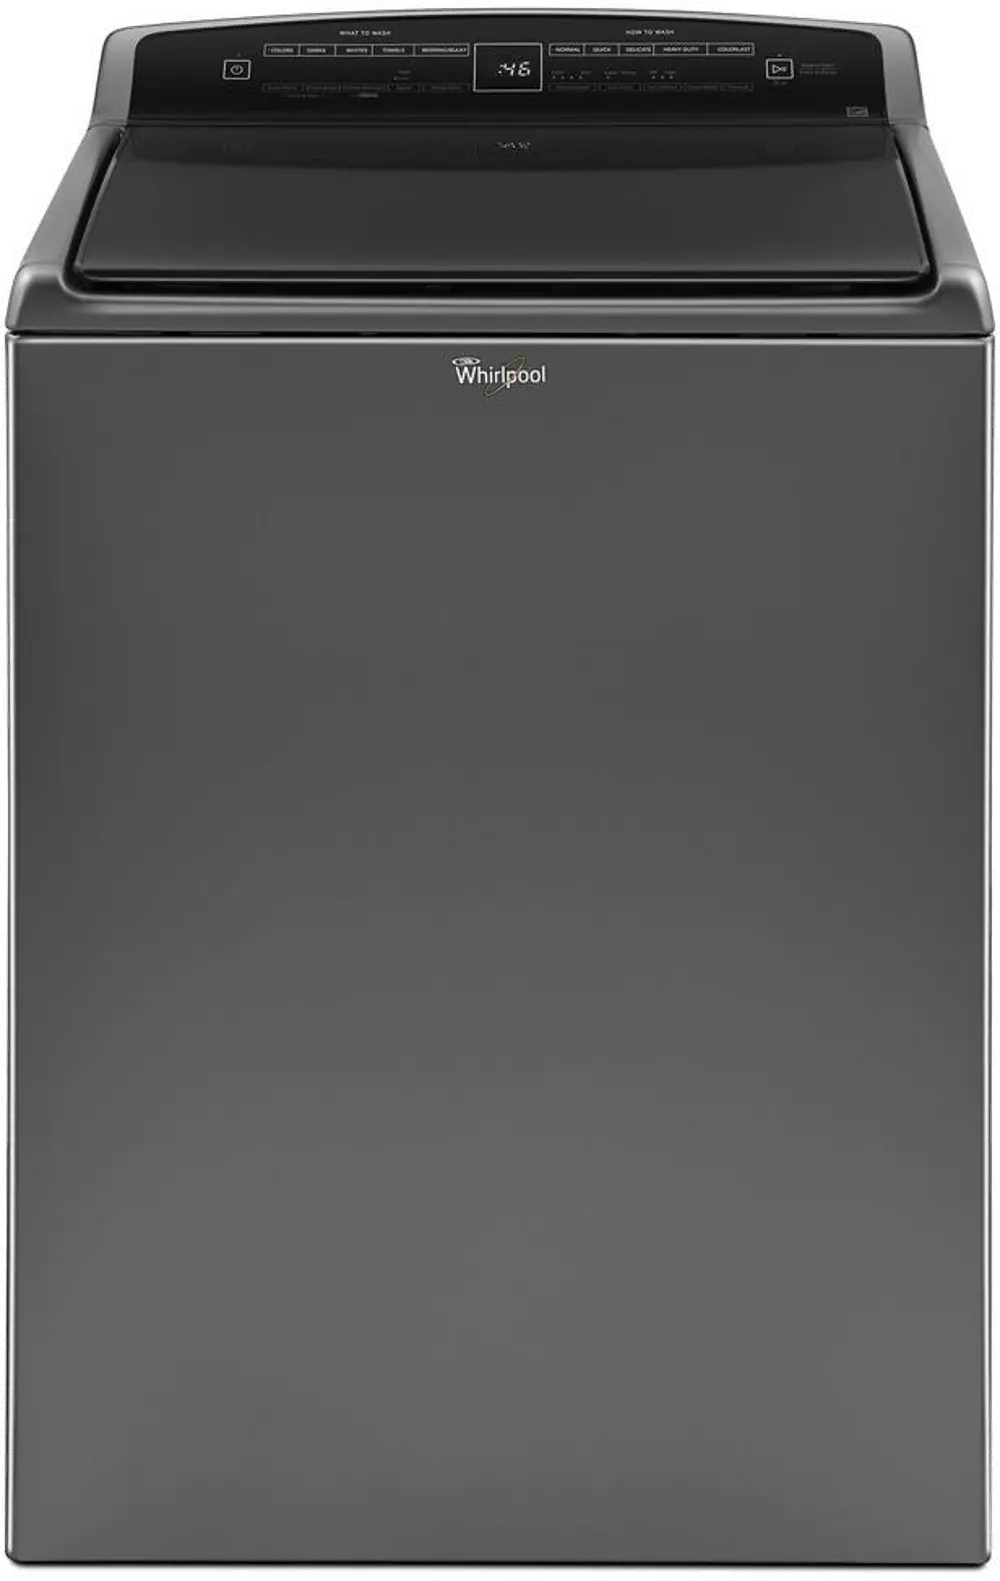 WTW7500GC Whirlpool Top Load Washer with Adaptive Wash Technology - 4.8 cu. ft. Chrome Shadow-1